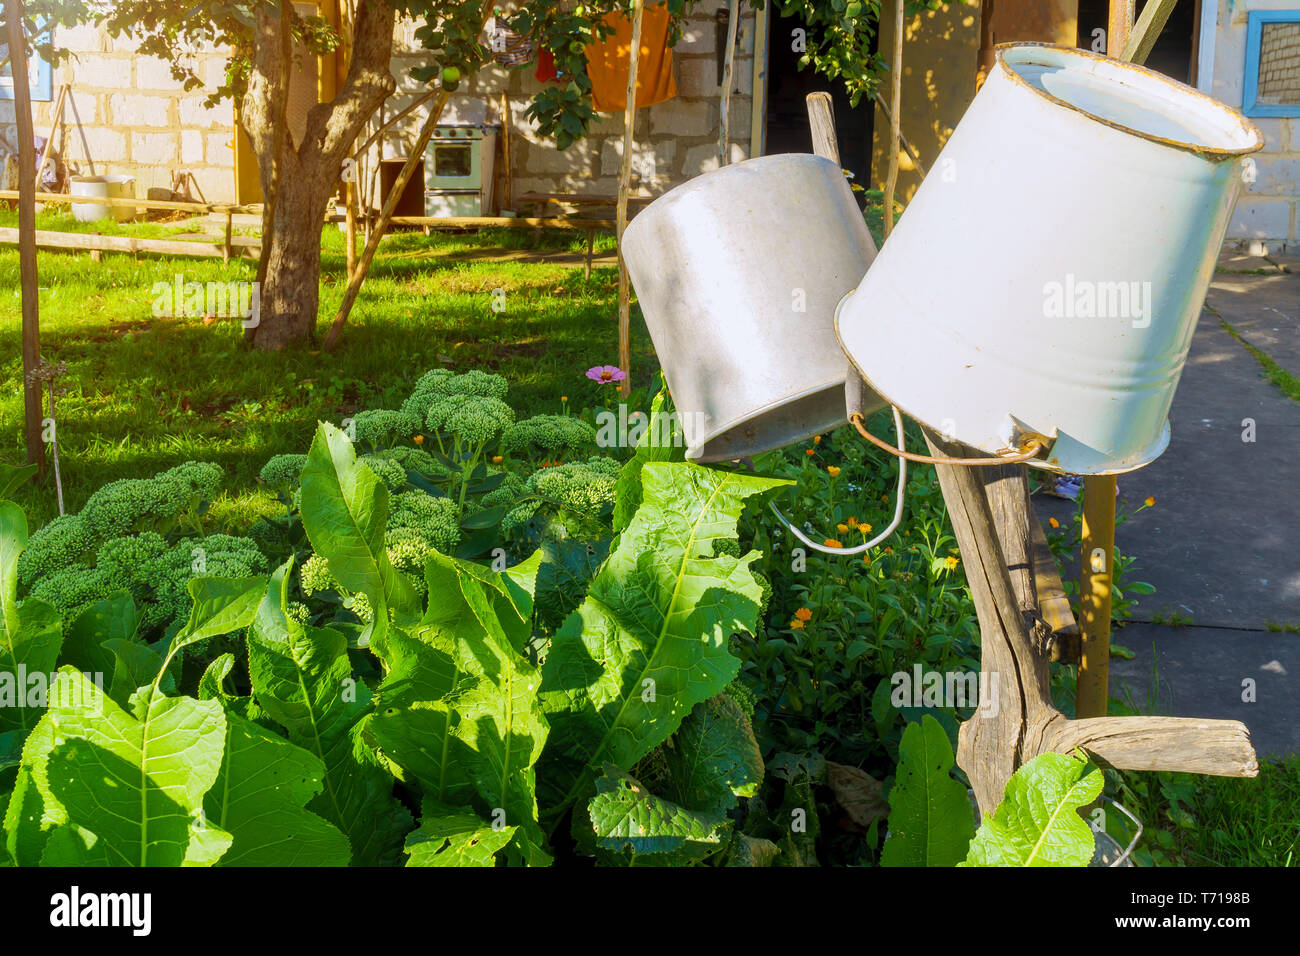 Two iron buckets hanging upside down on the branch in garden Stock Photo